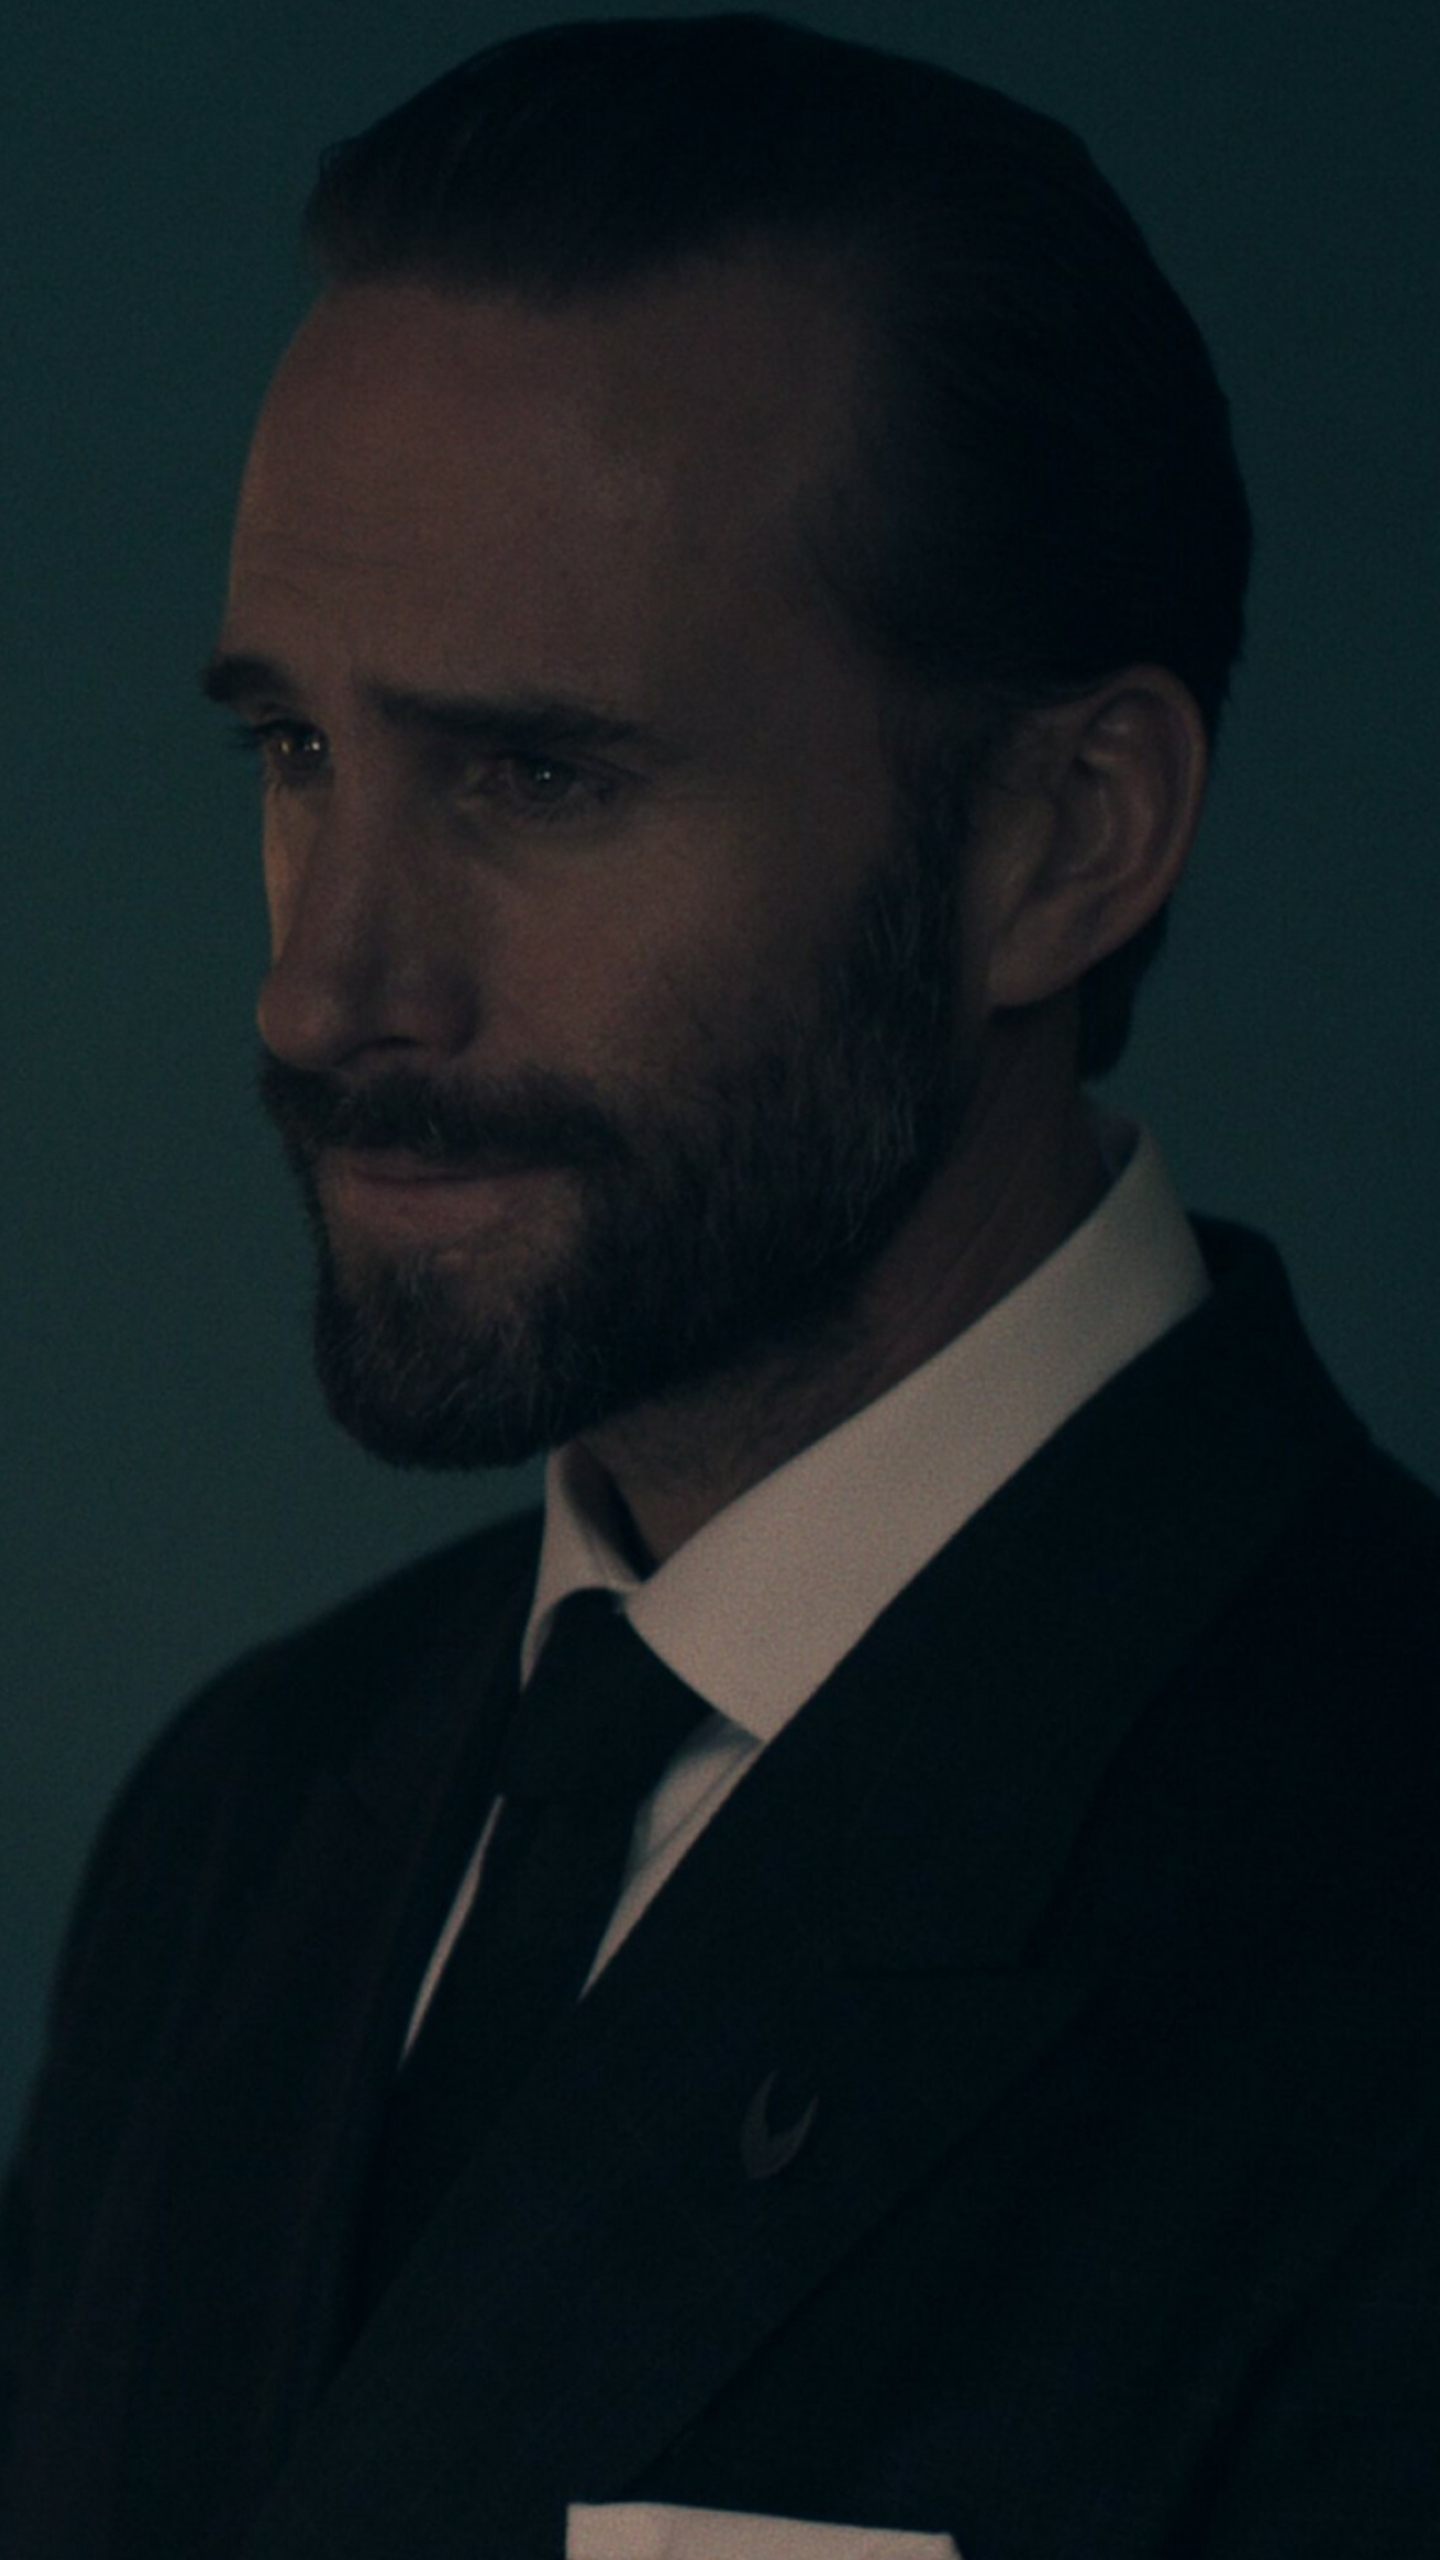 The Handmaid's Tale: Joseph Fiennes, Commander Fred Waterford, A high-ranking government official. 1440x2560 HD Wallpaper.